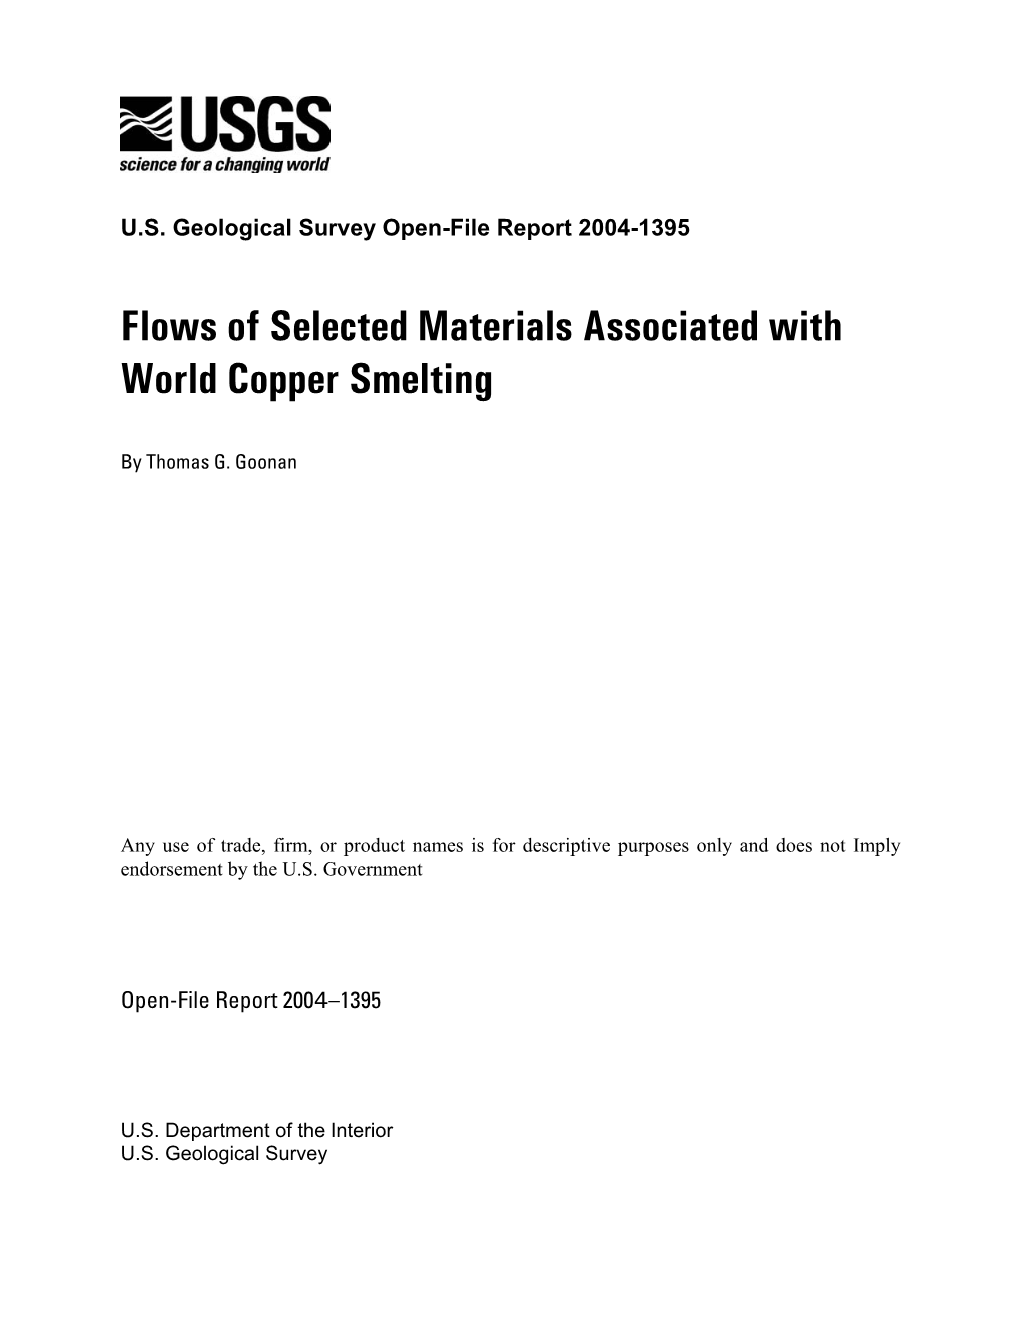 Flows of Selected Materials Associated with World Copper Smelting